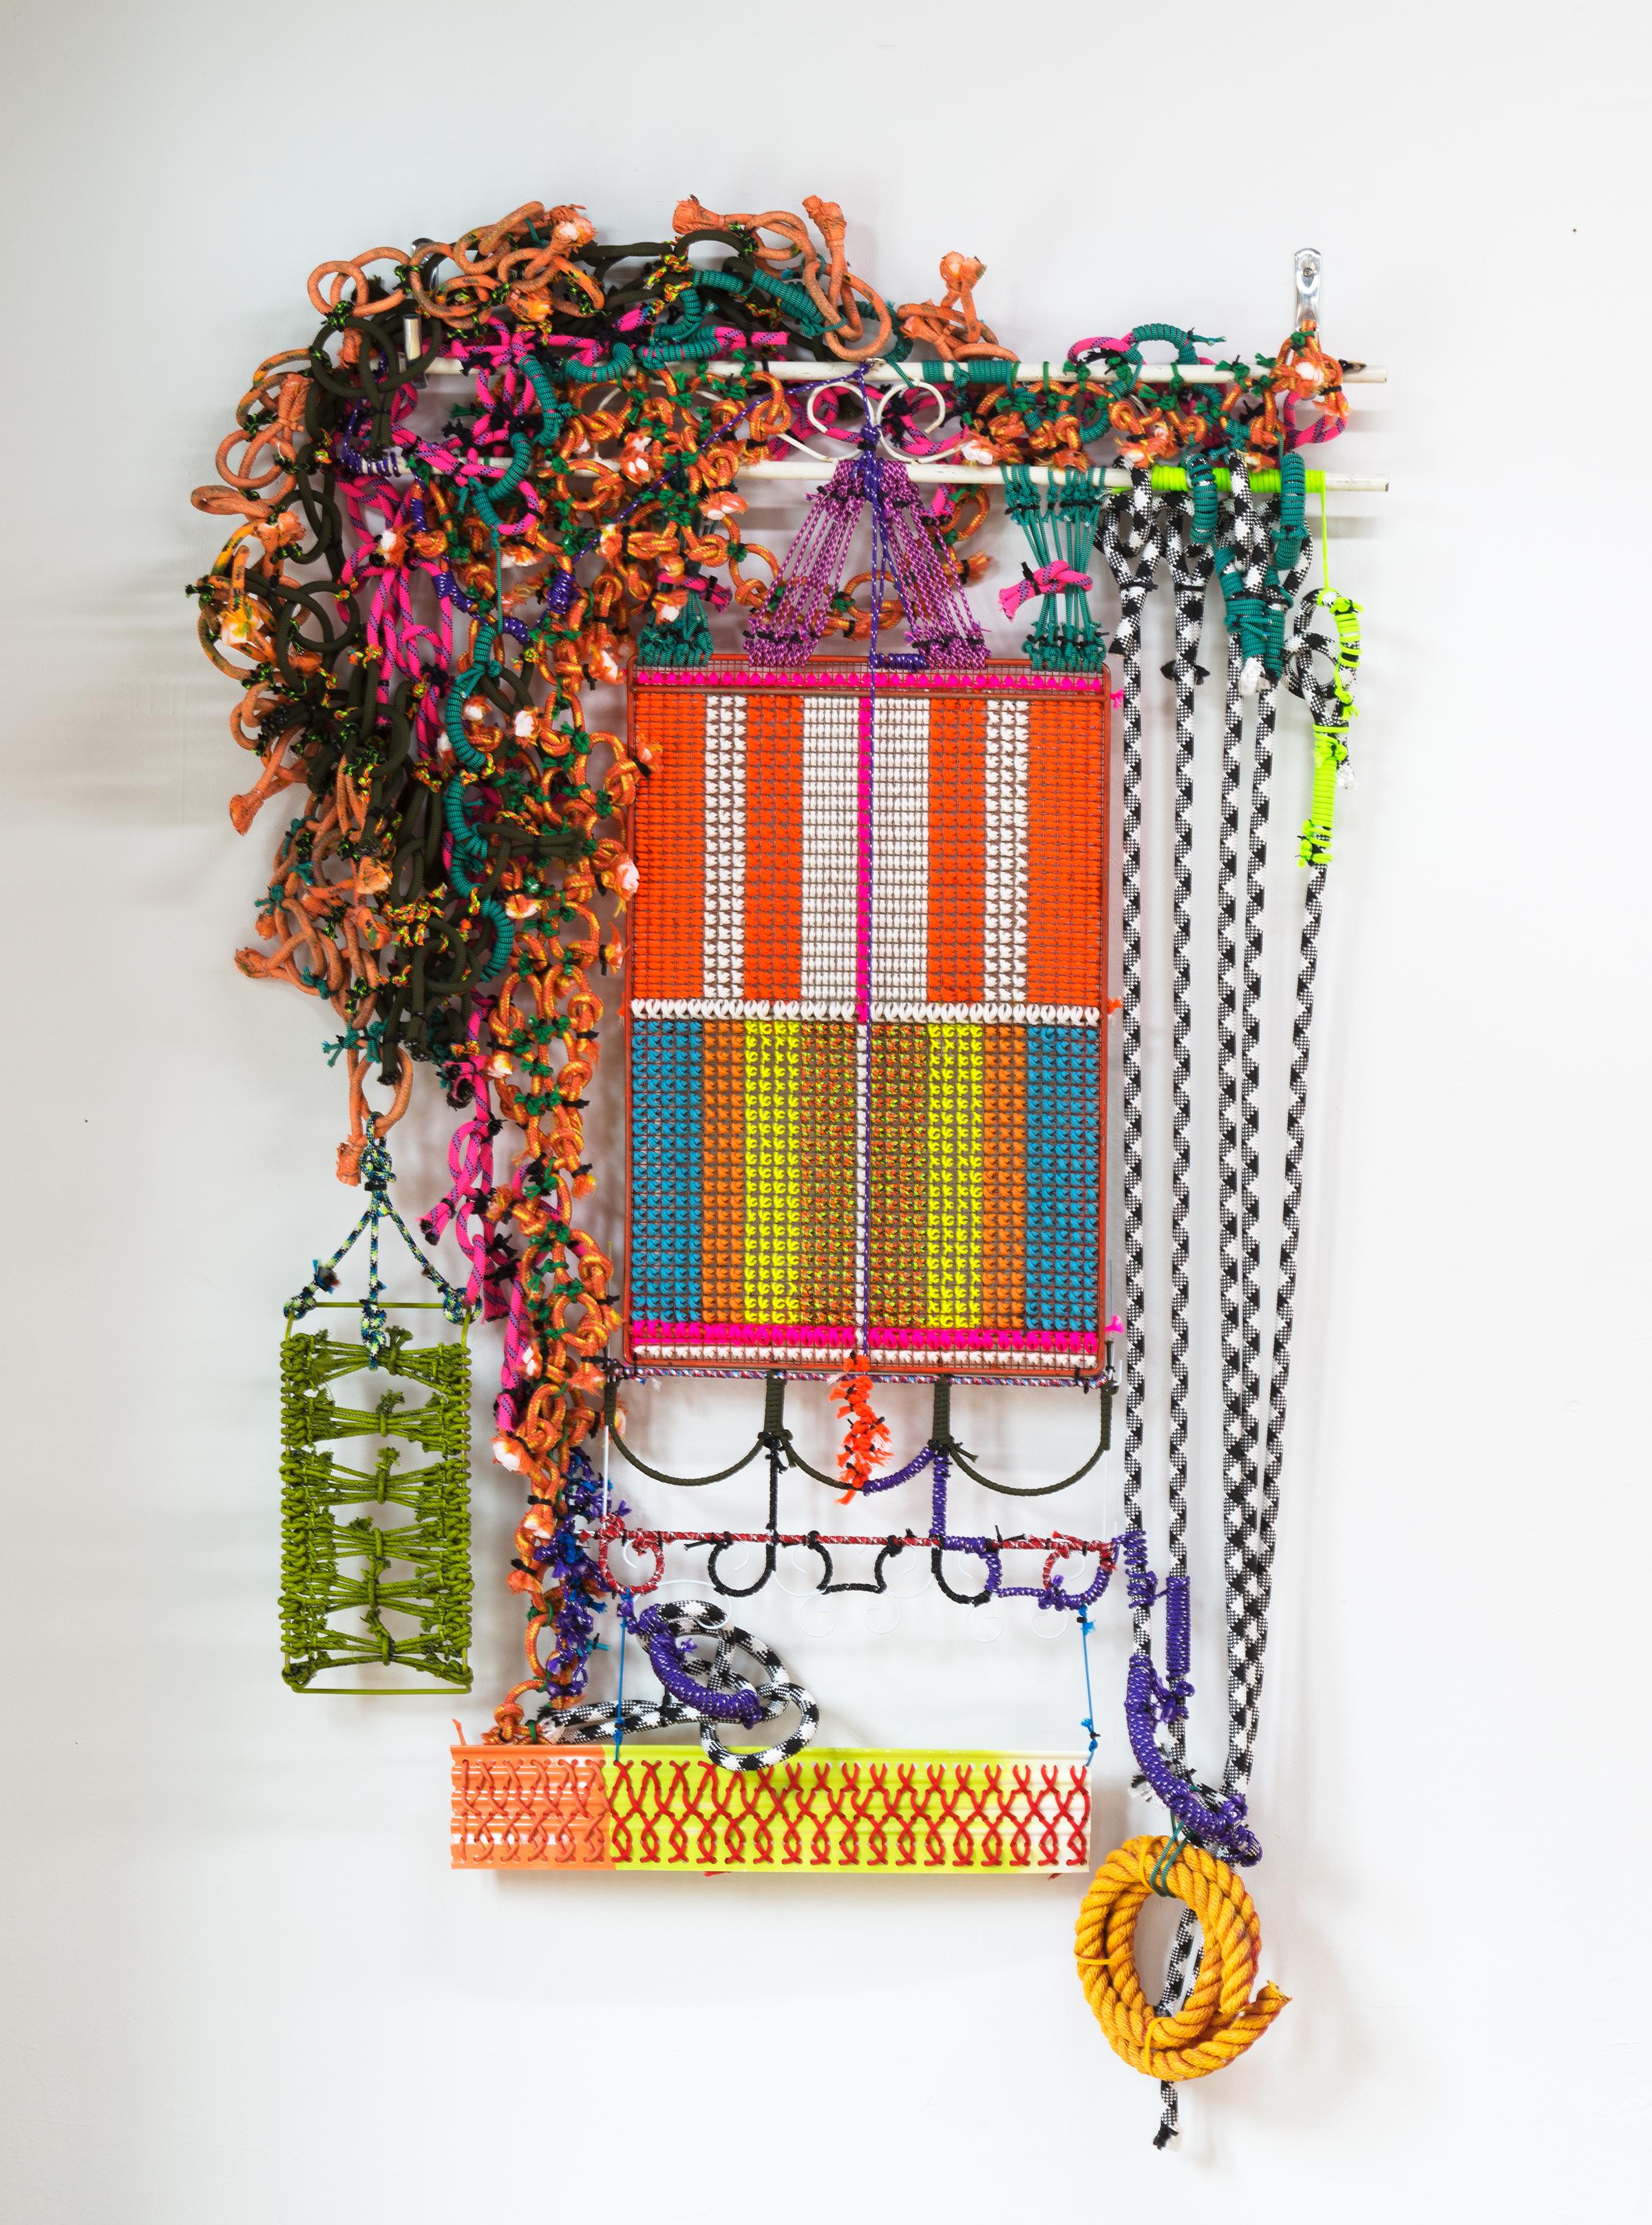 ARCHITECTURAL HYPERBOLE 04 Sculptural Wall Hanging w/ Found & Repurposed Objects